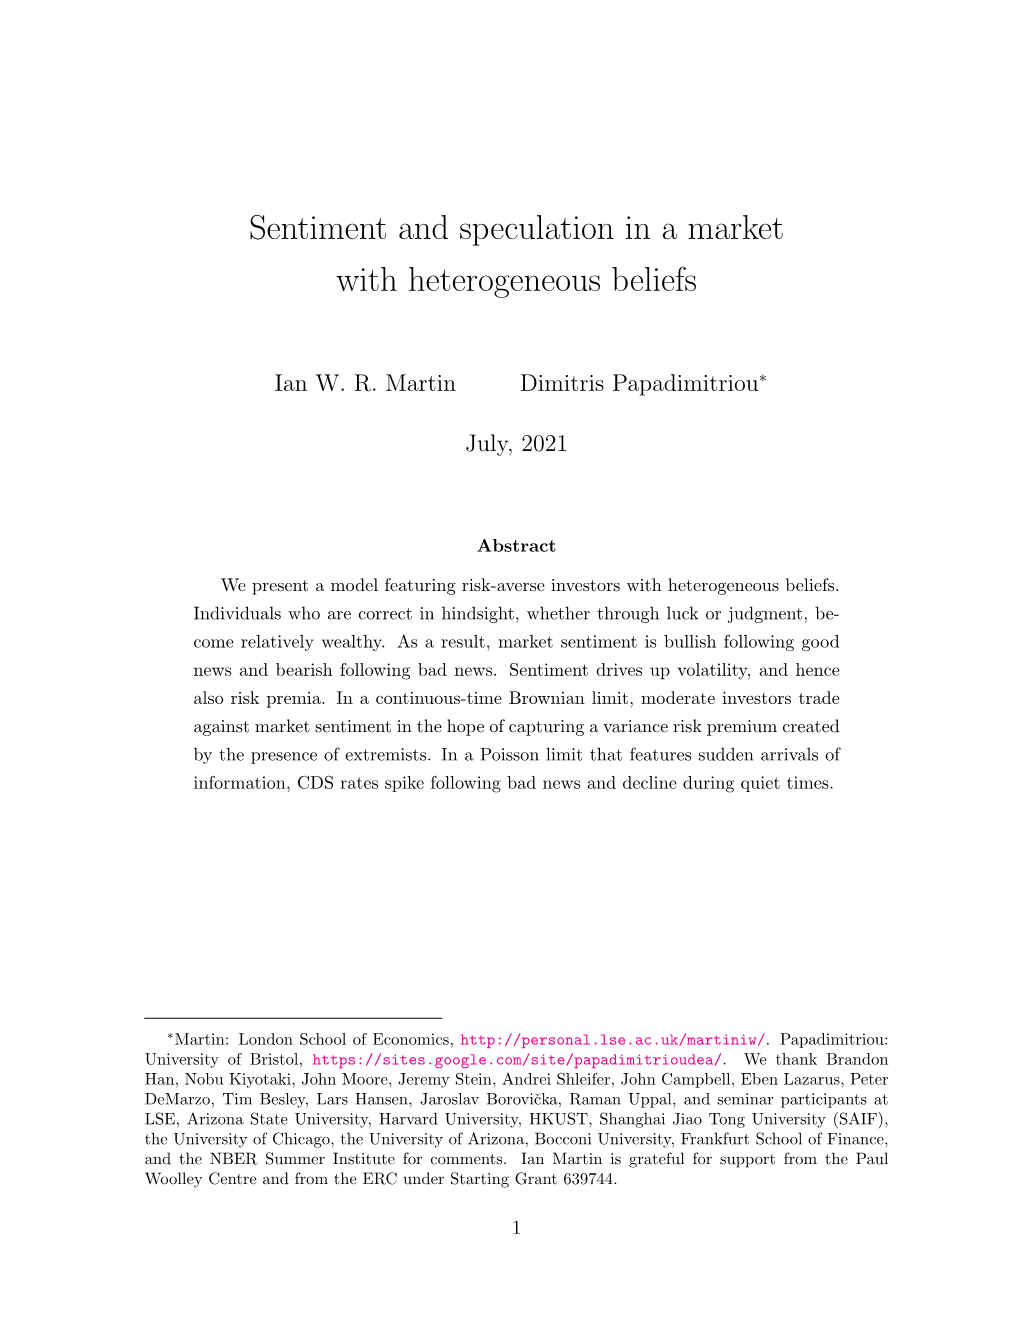 Sentiment and Speculation in a Market with Heterogeneous Beliefs